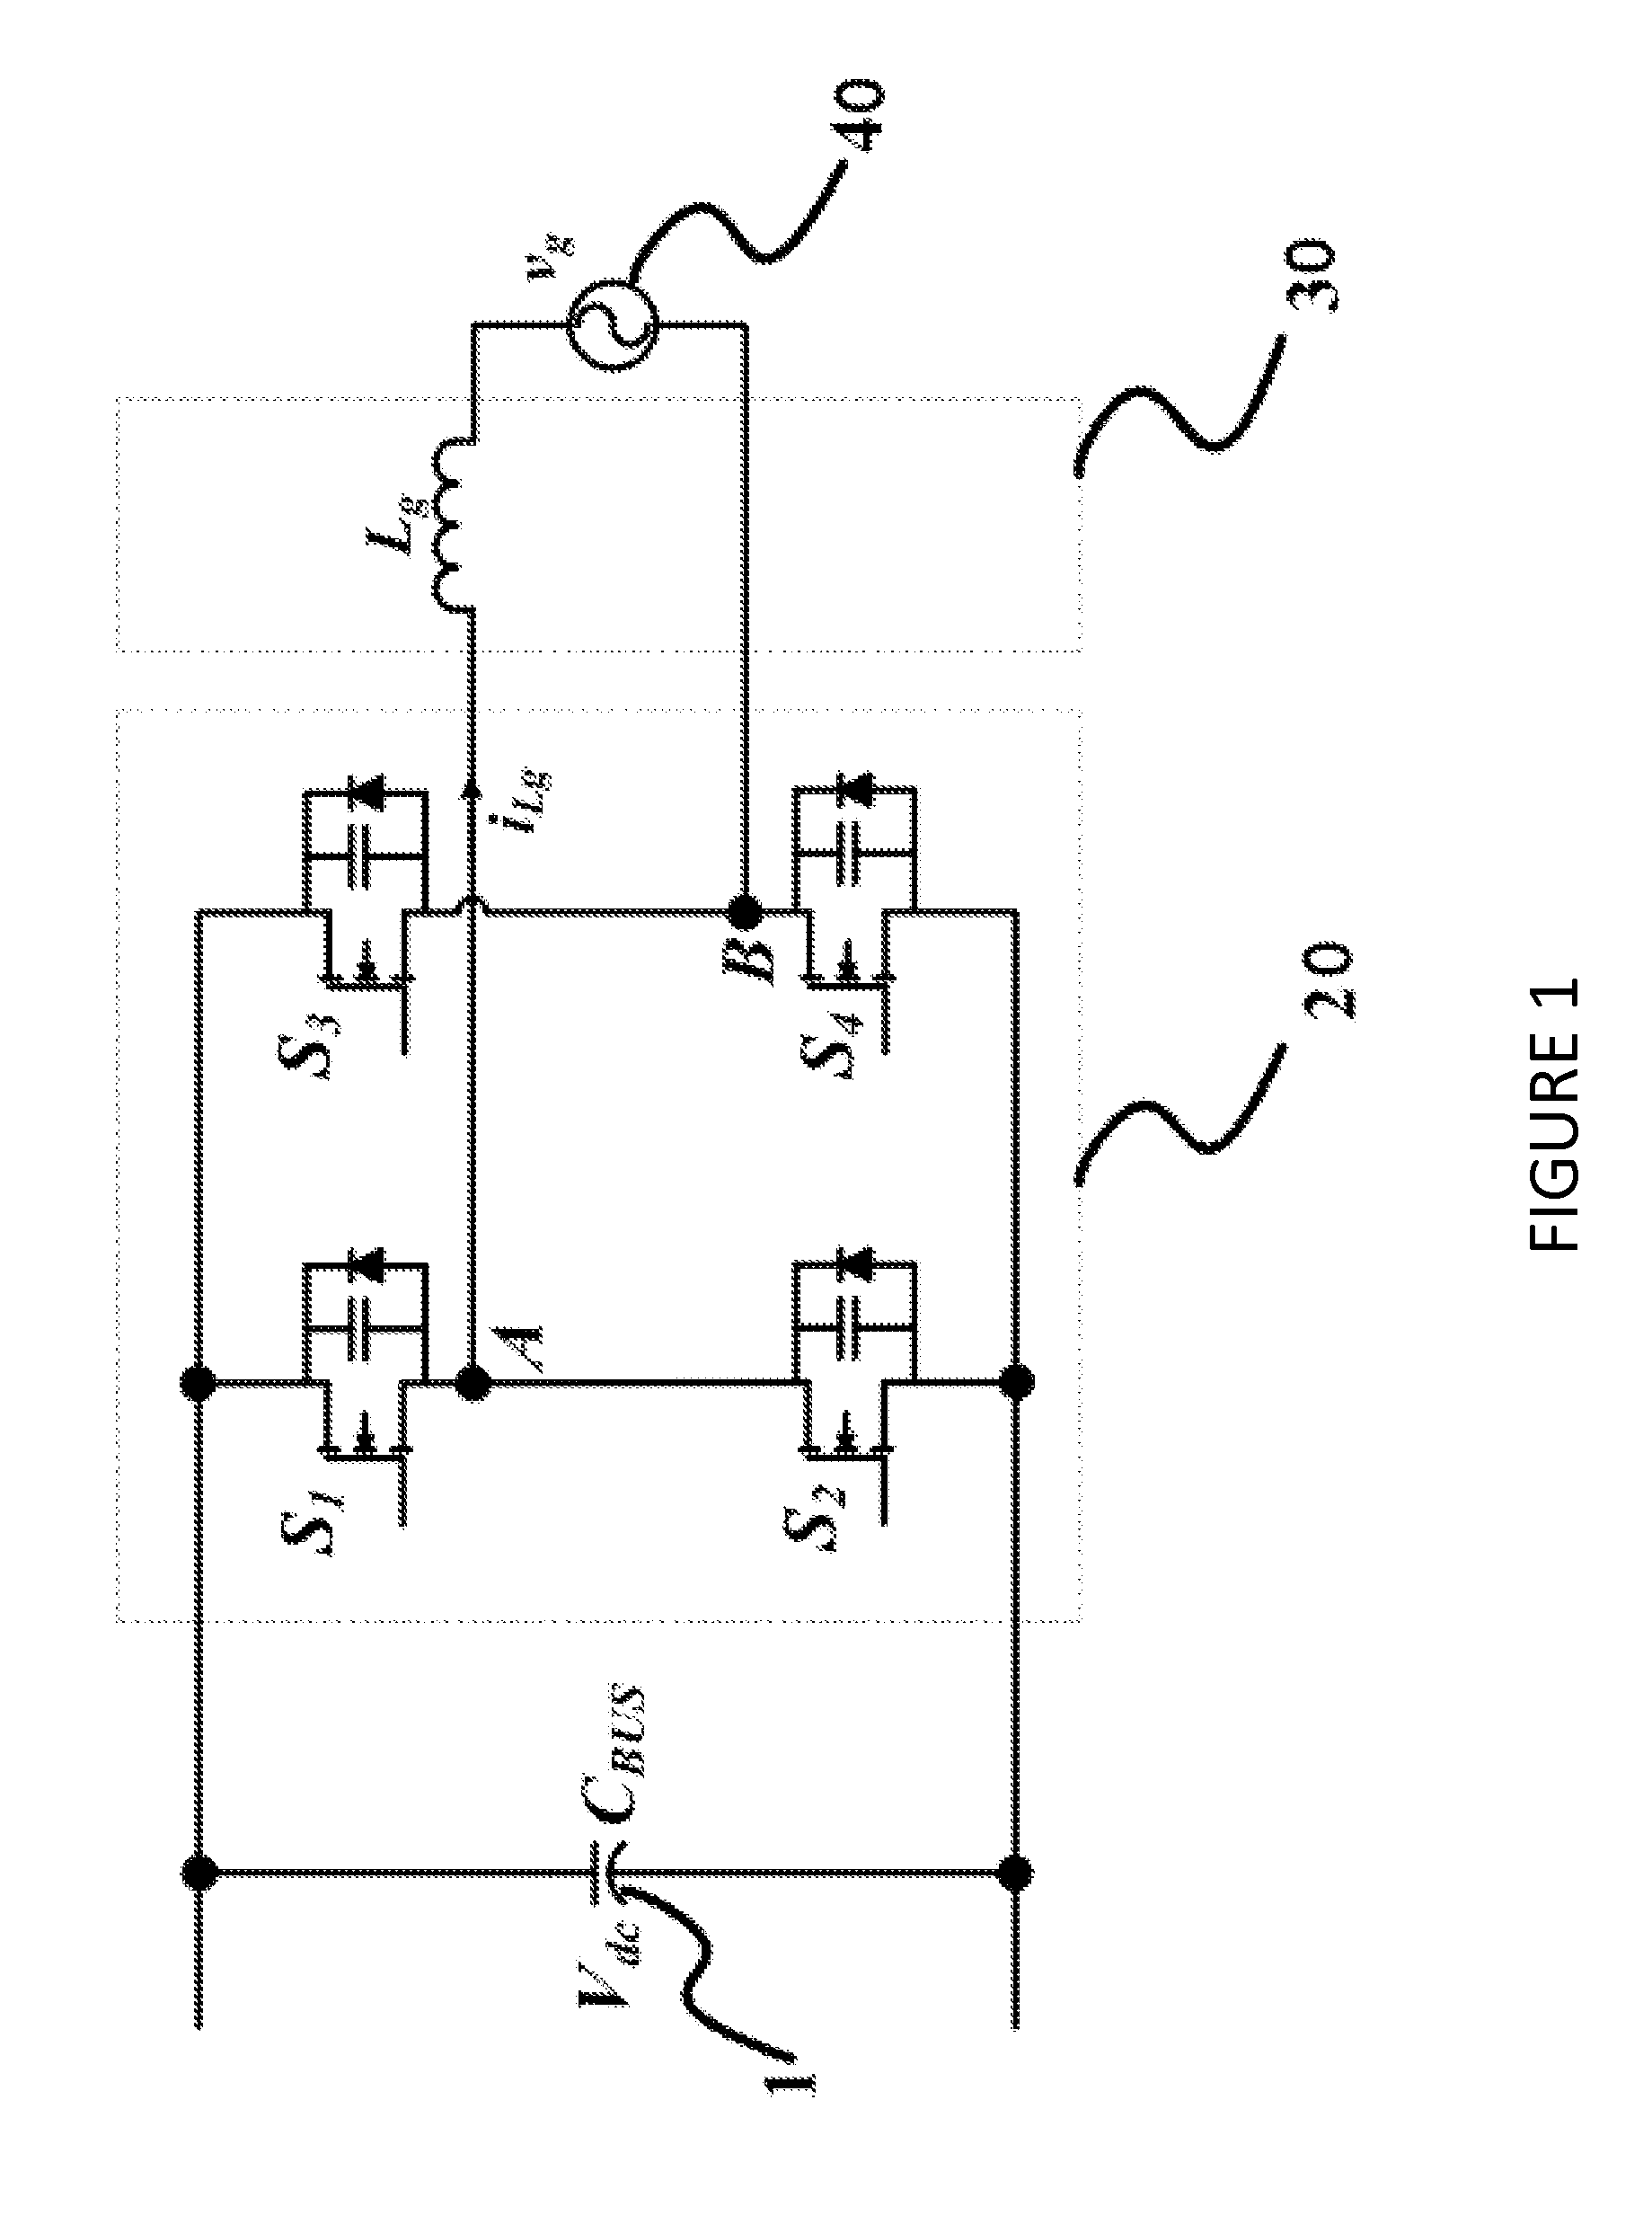 Zvs voltage source inverter with reduced output current ripple